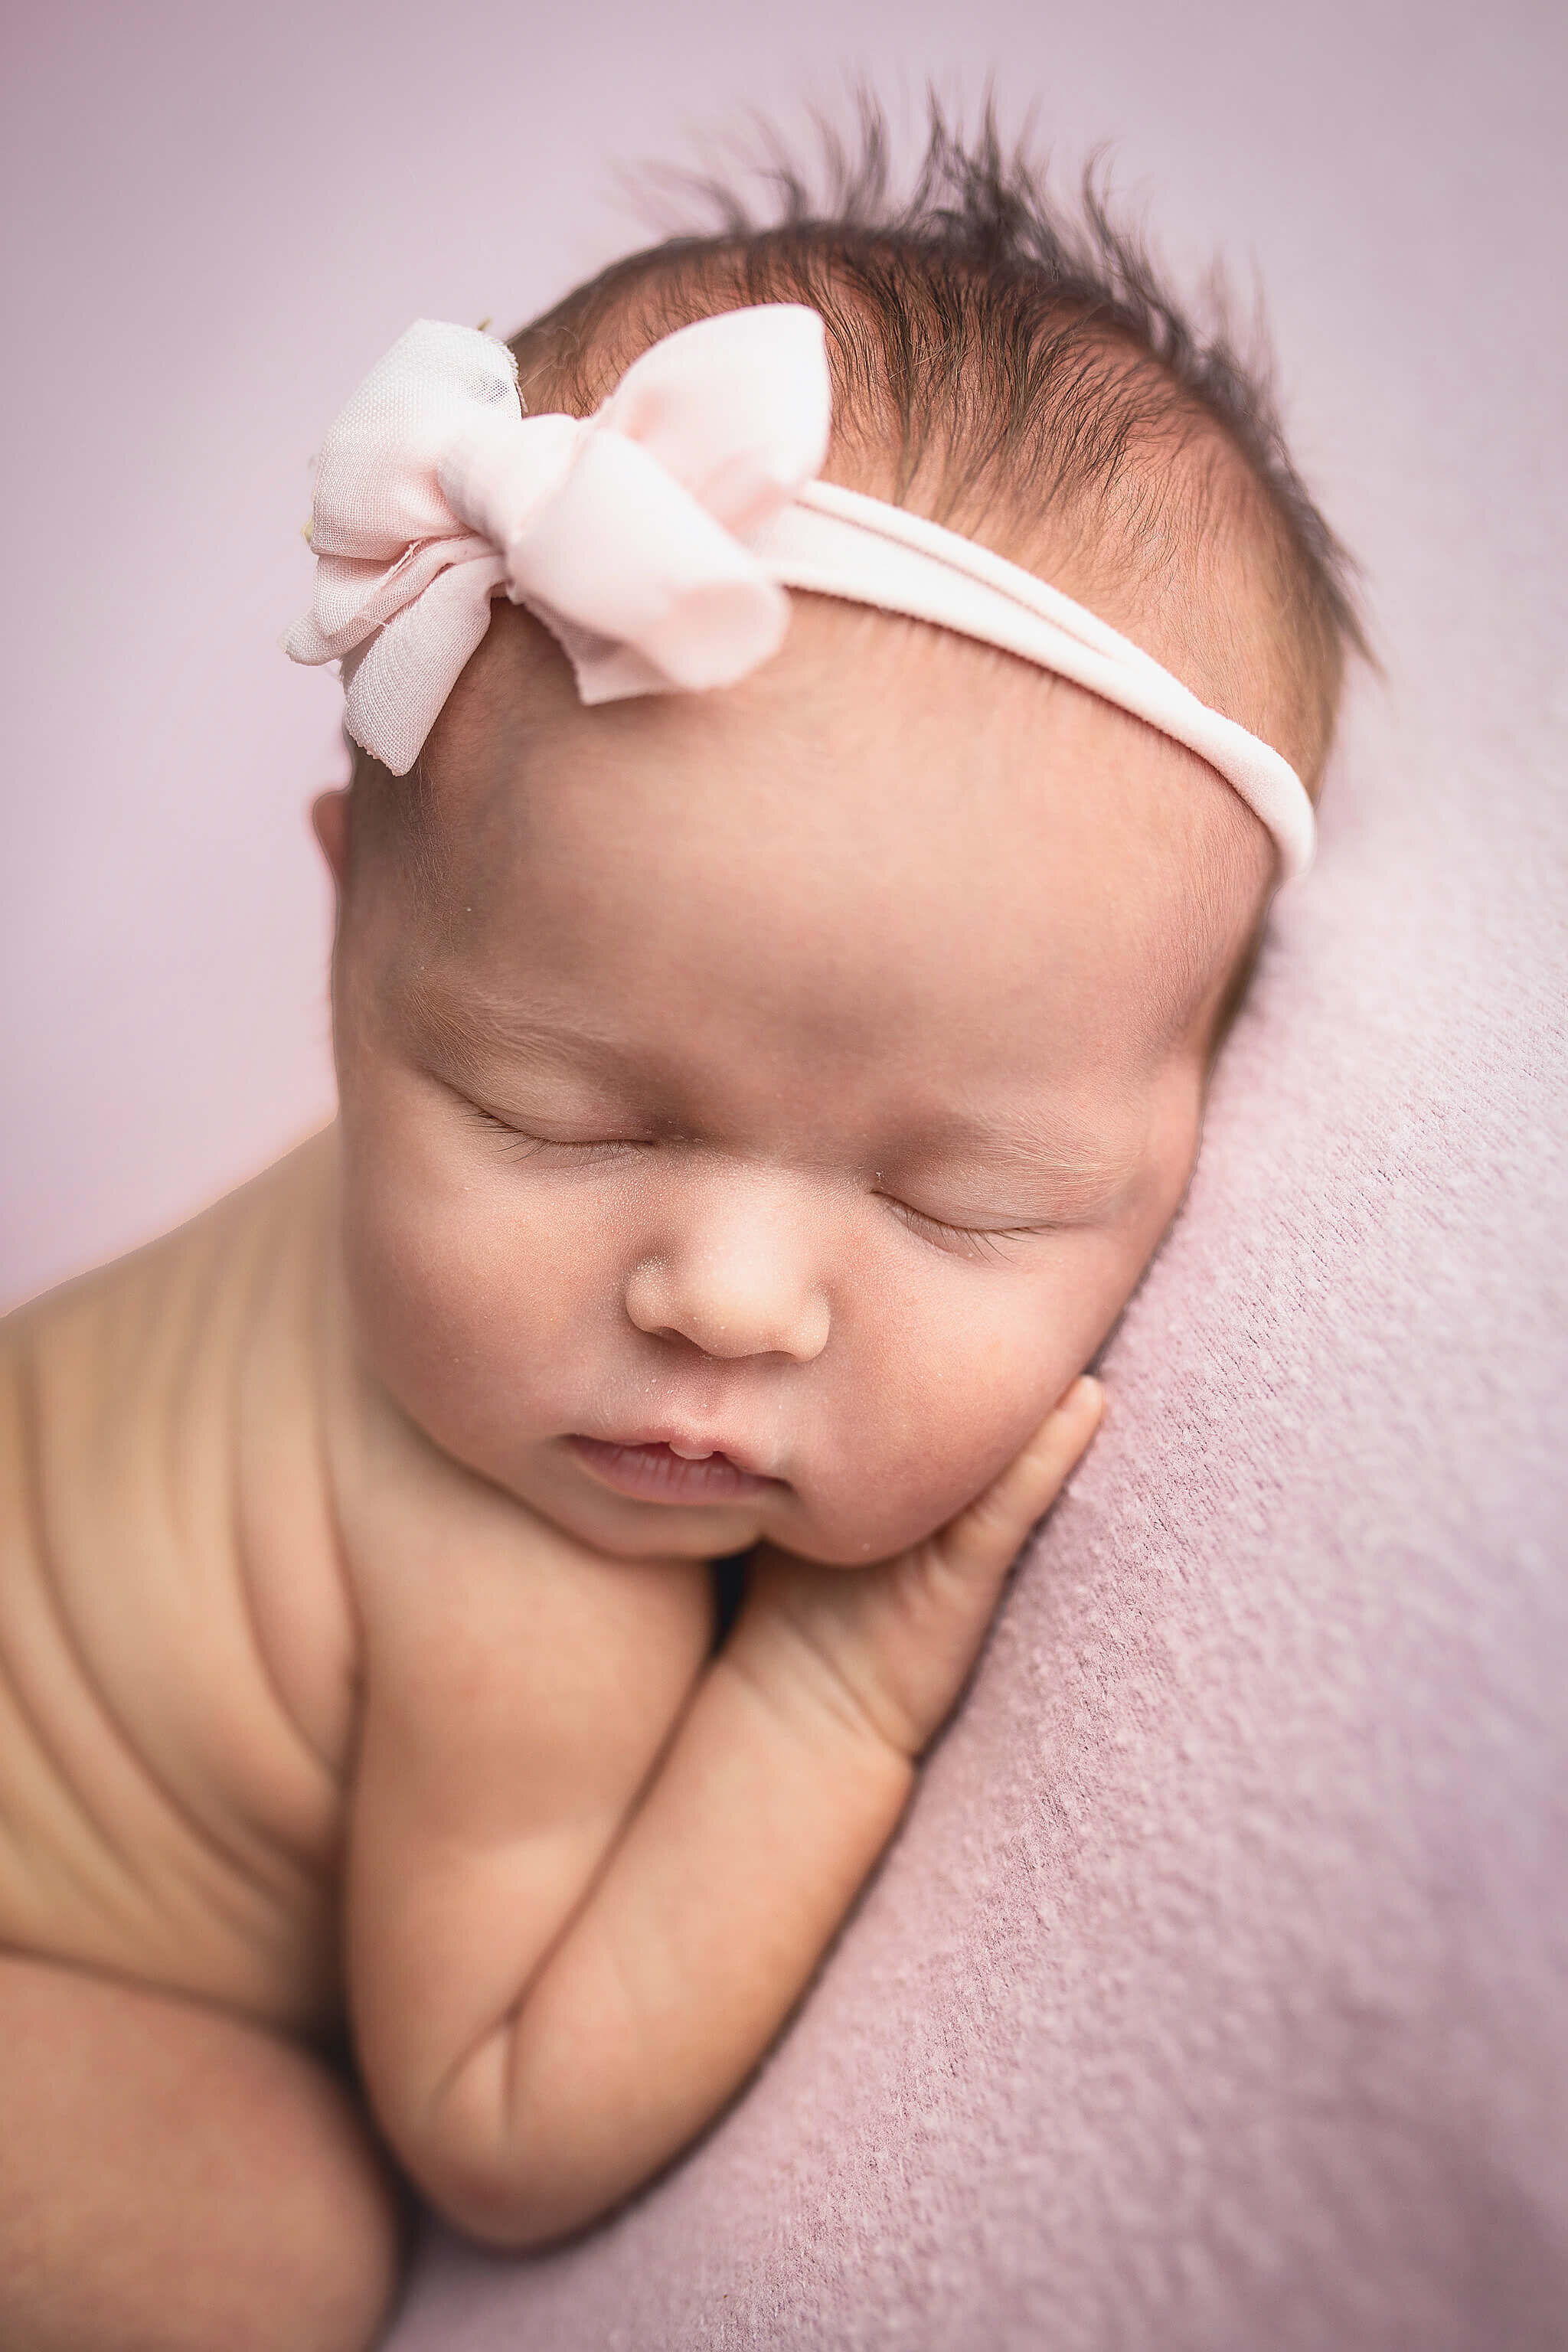 newborn baby girl laying on a pink blanket while sleeping.  pink bow on her head.